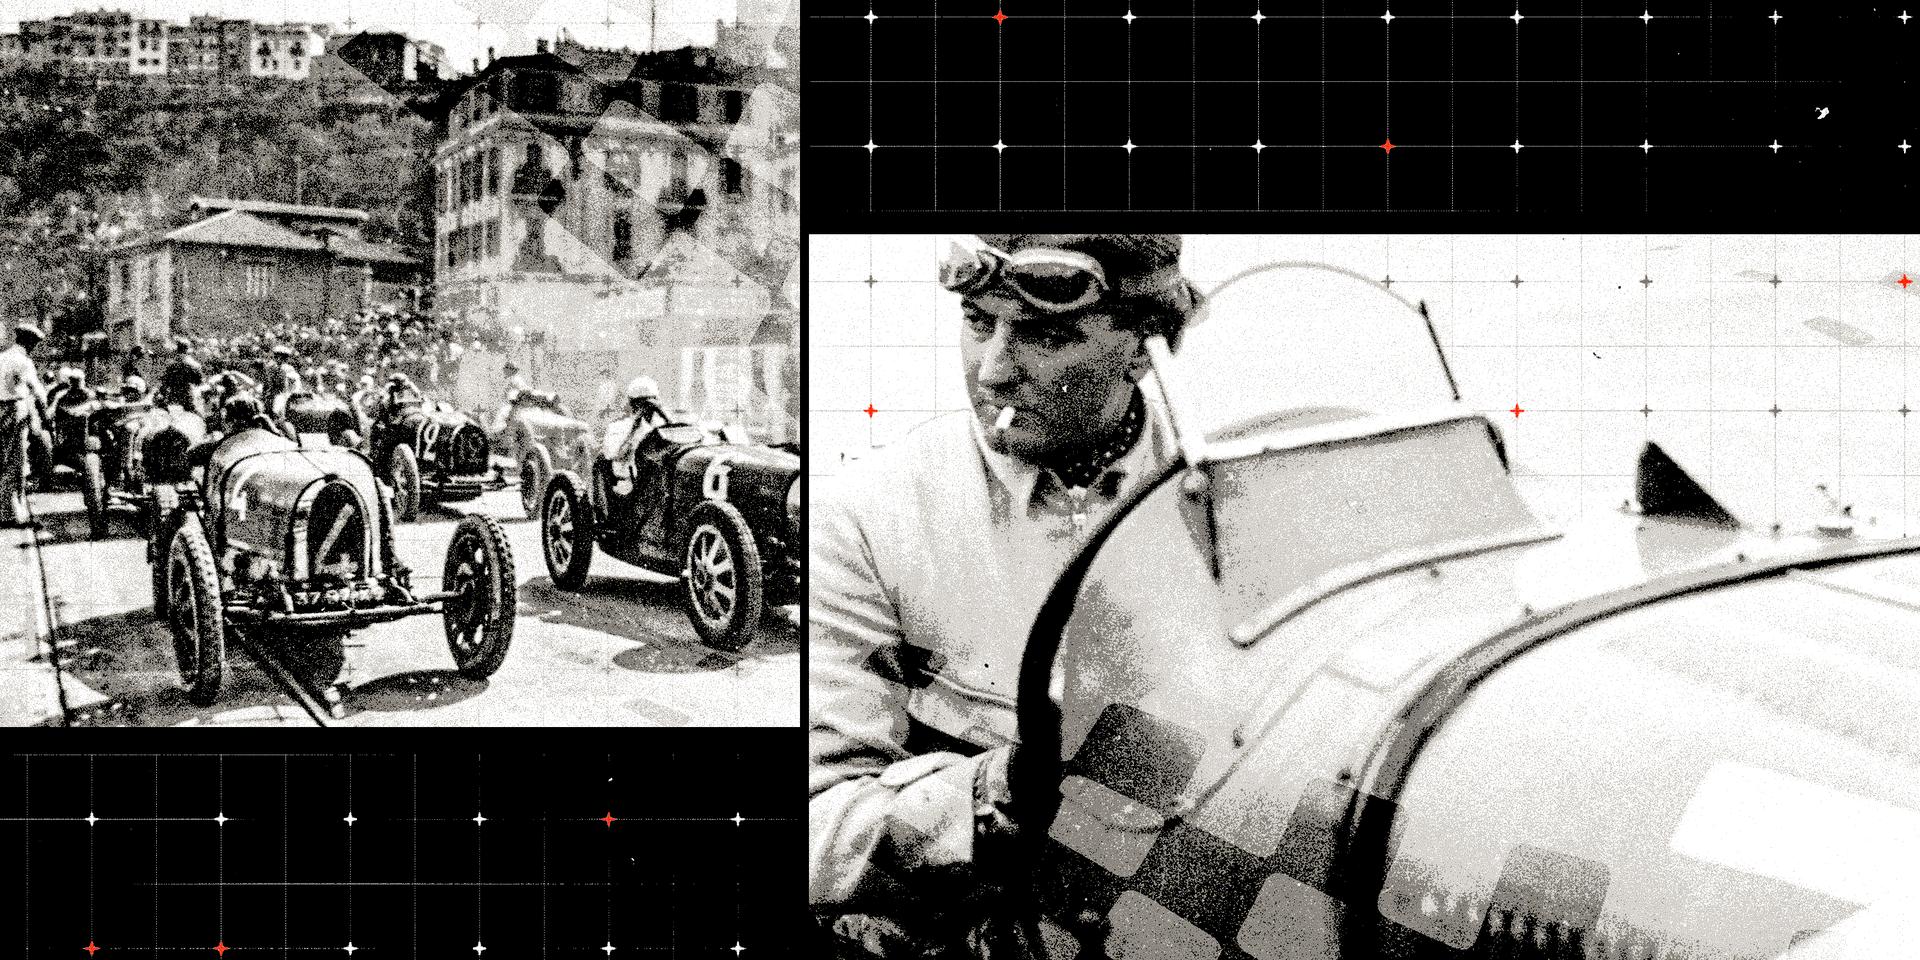 'Gallant and courageous': The Monaco GP winner who died a WWII resistance fighter